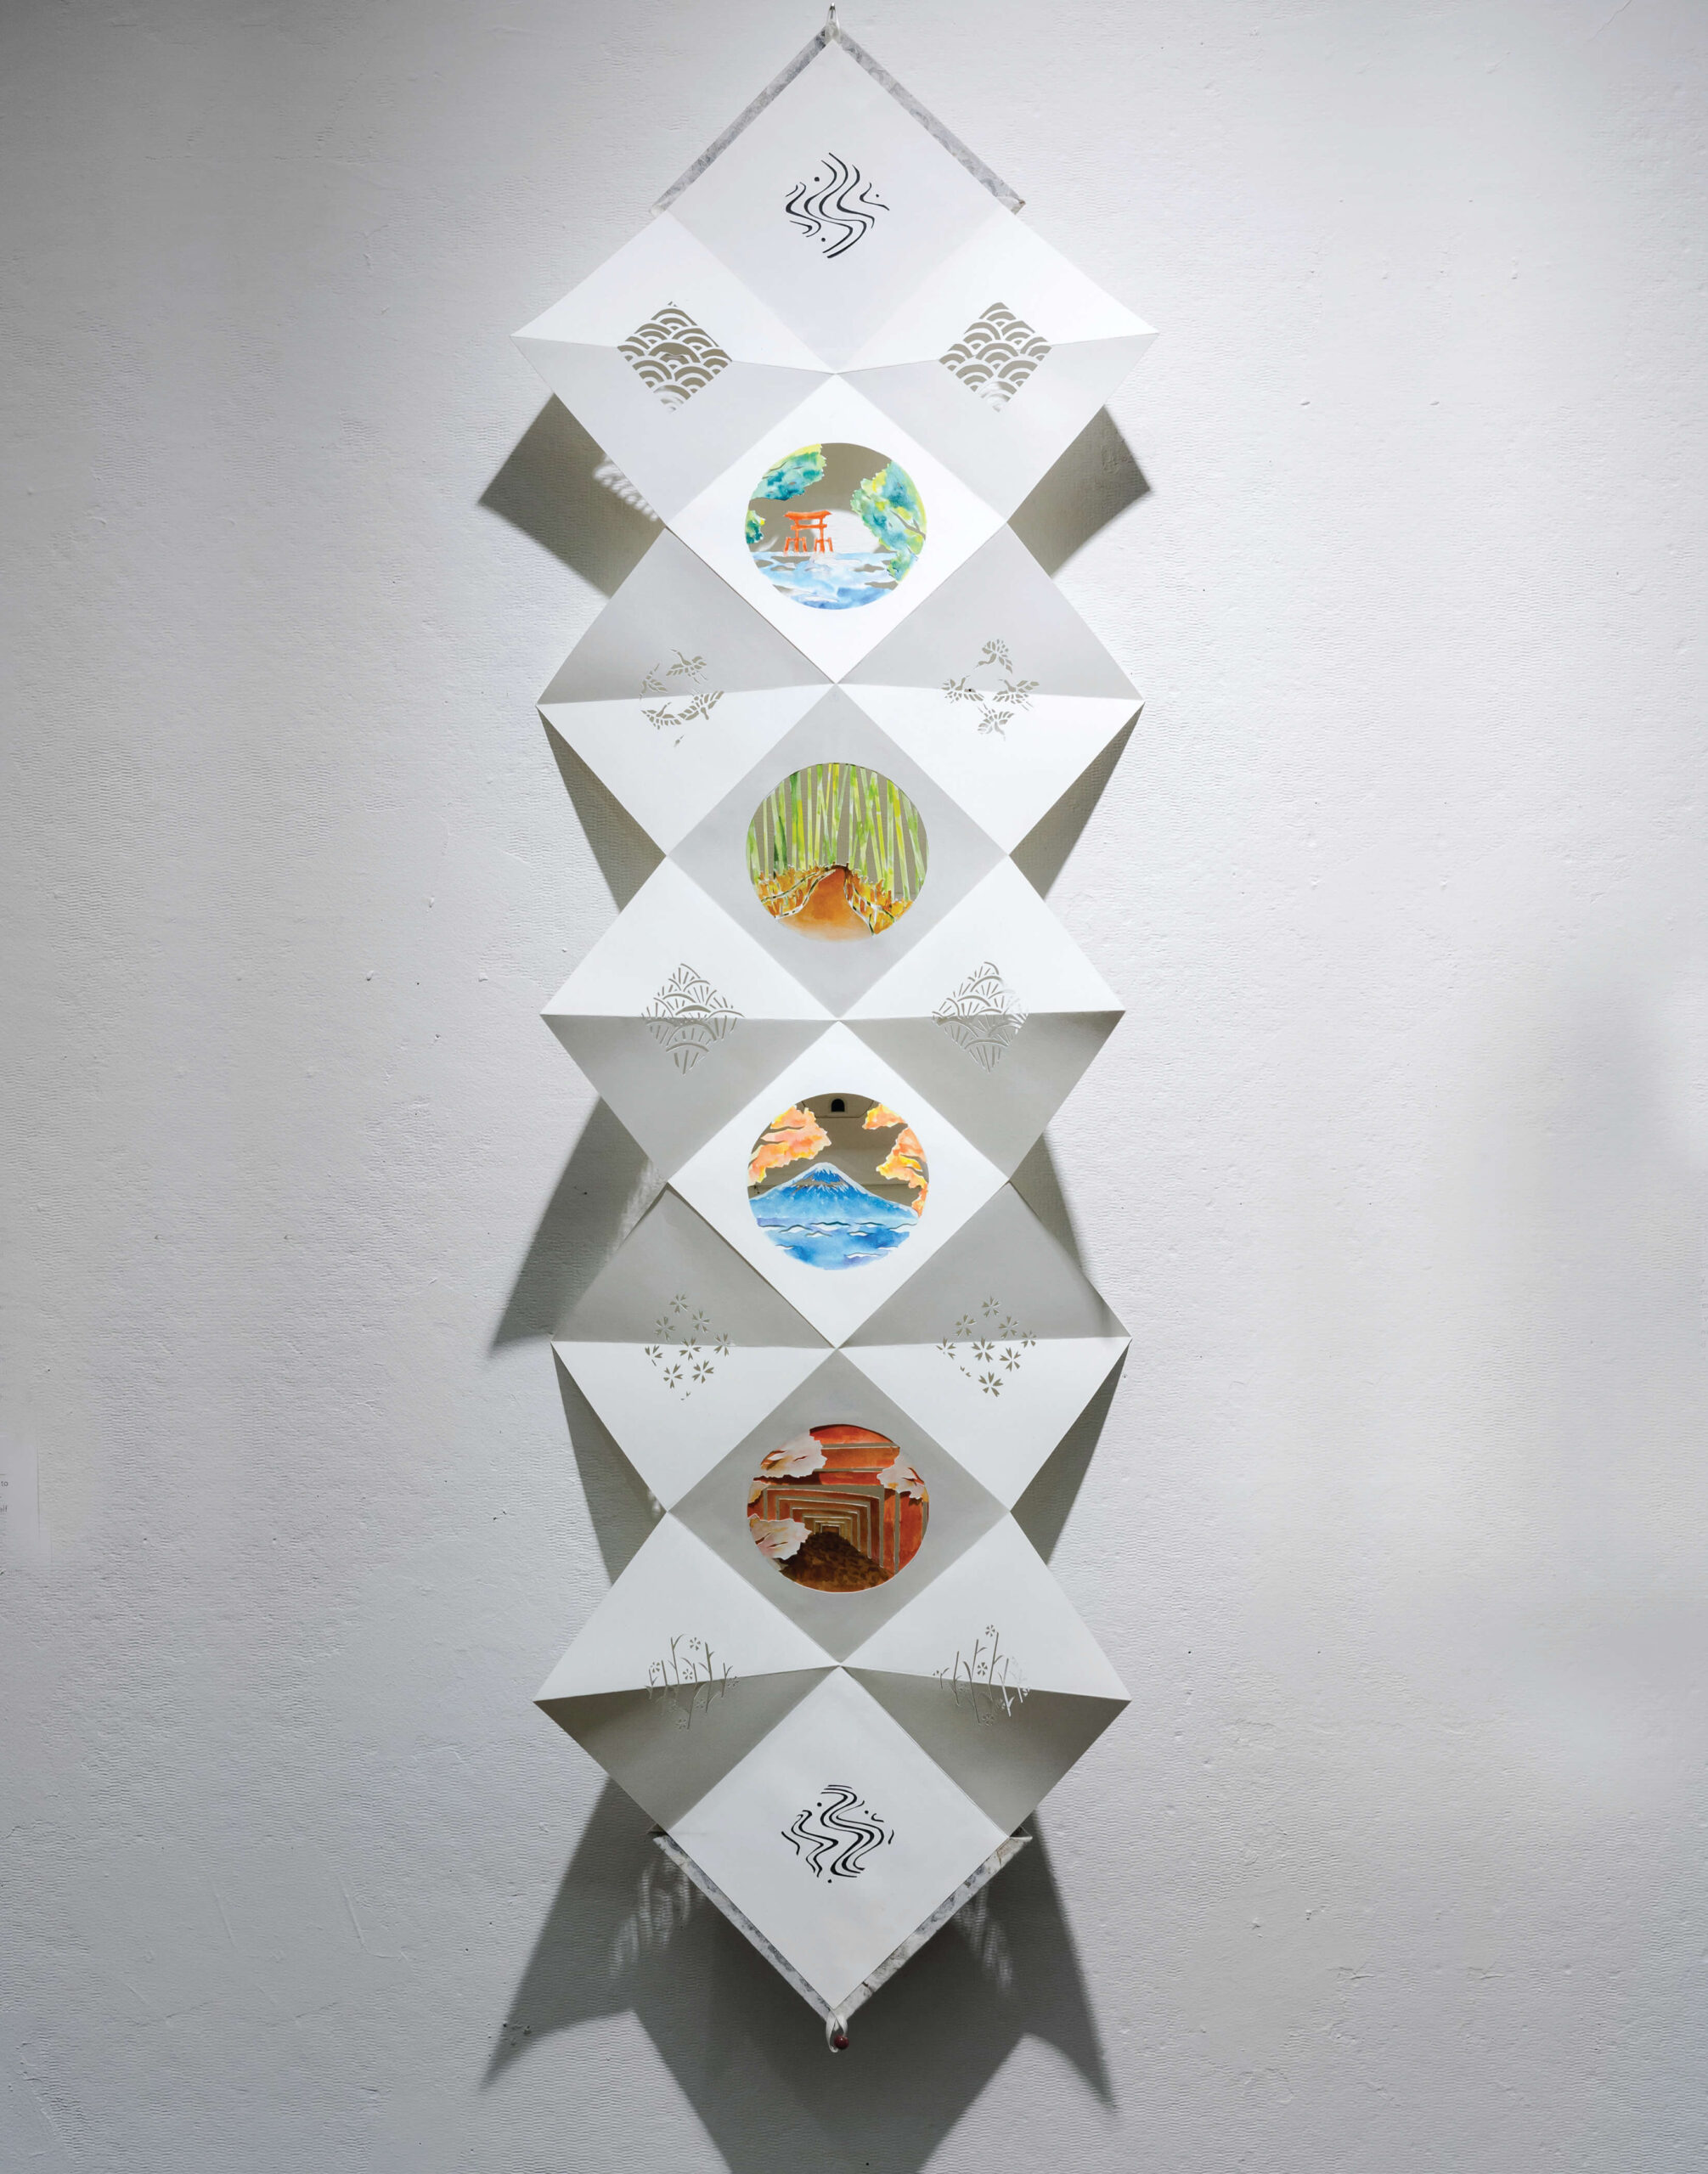 An origami paper sculpture with a colorful drawing along triangular faces is hung against a white wall.